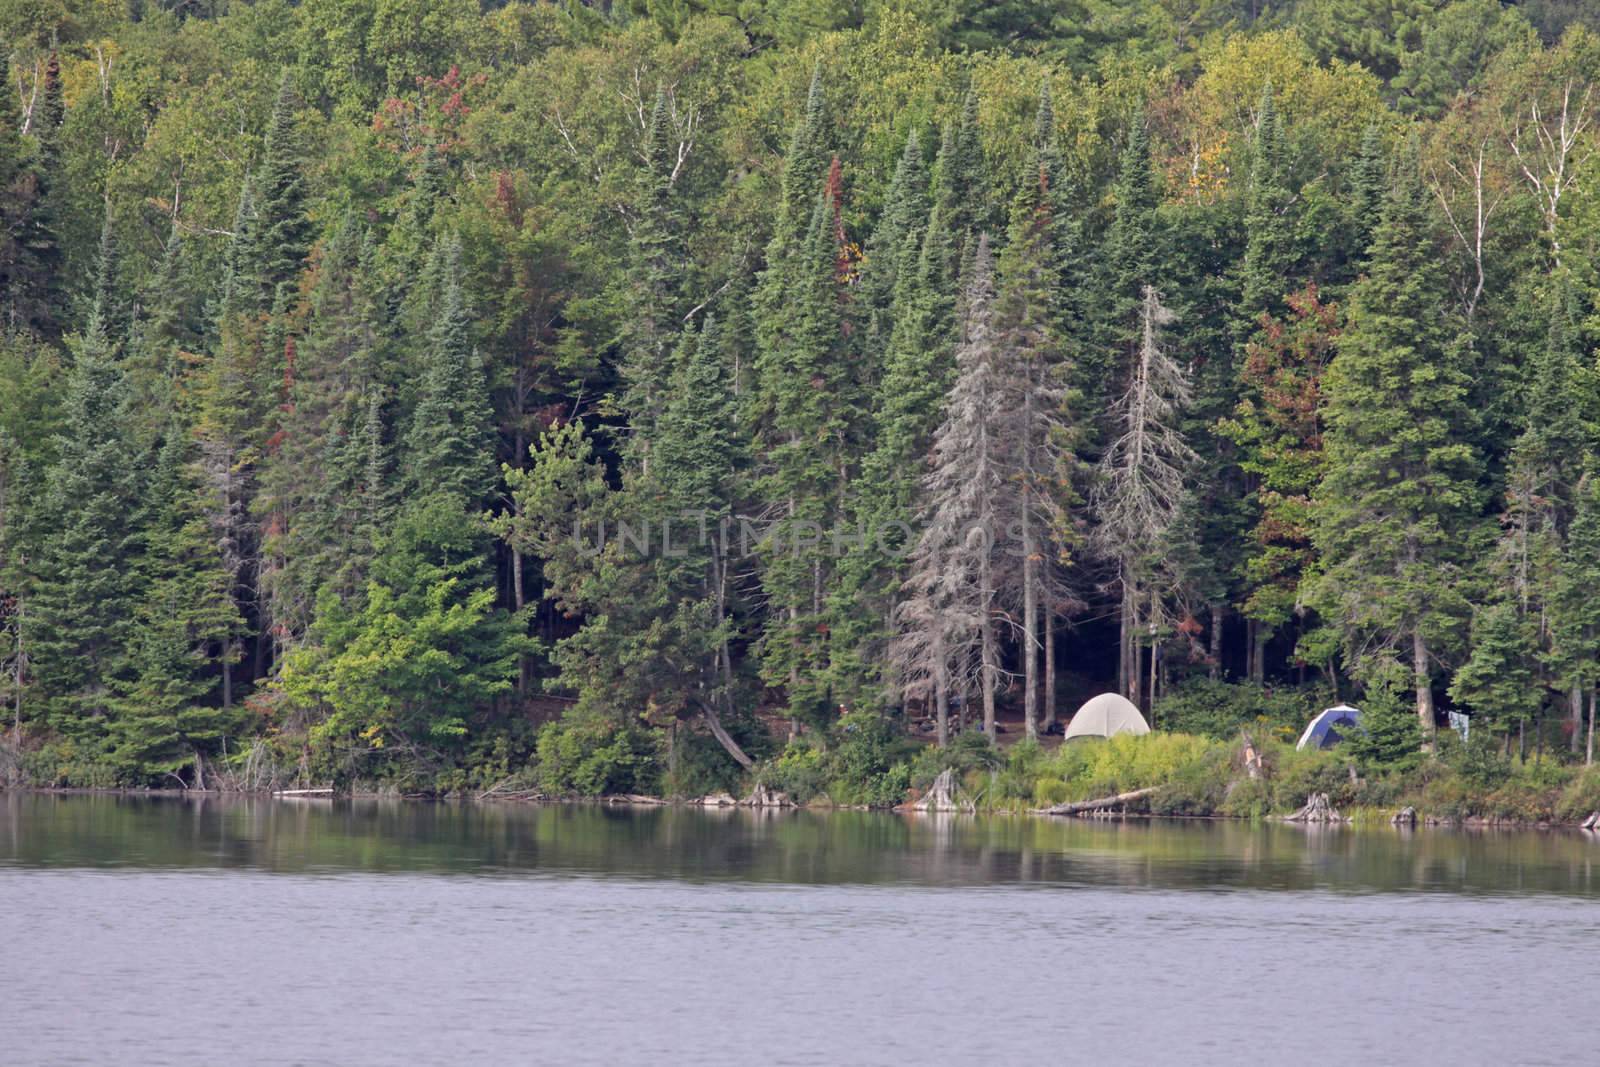 A campsite sitting in on the edge of a lake in Algonquin Provincial Park in Ontario, Canada.
